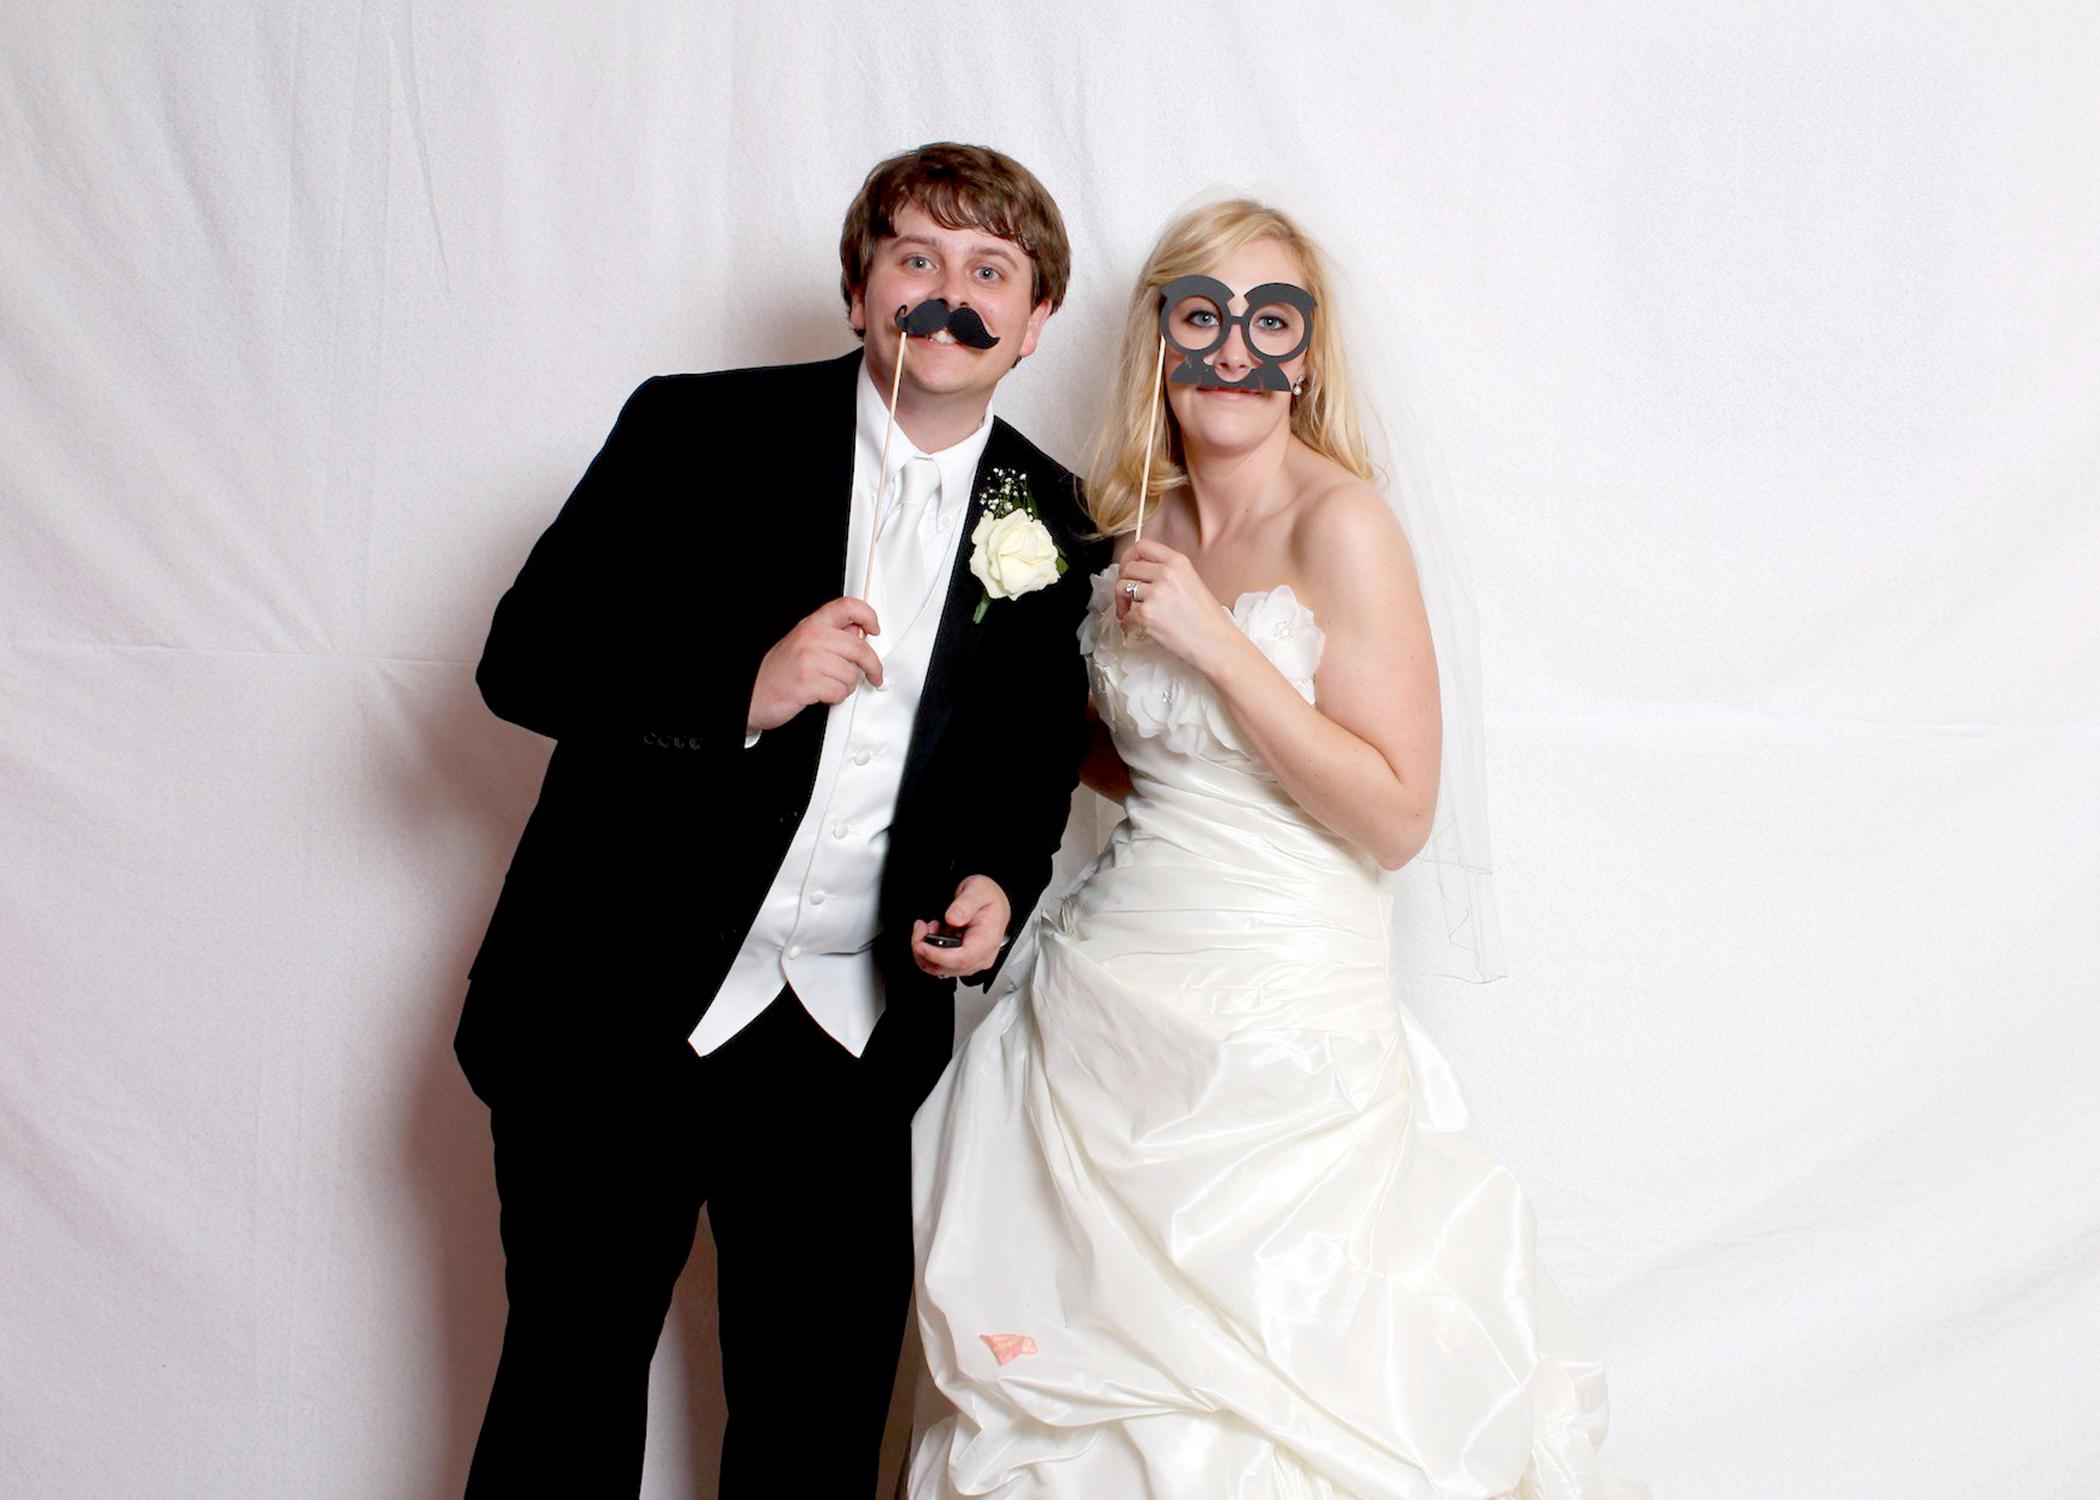 A photo booth at the wedding reception gives newlyweds a chance to take informal pictures that complement their formal portraits and capture the lighthearted side of their relationship. (Submitted Photo)